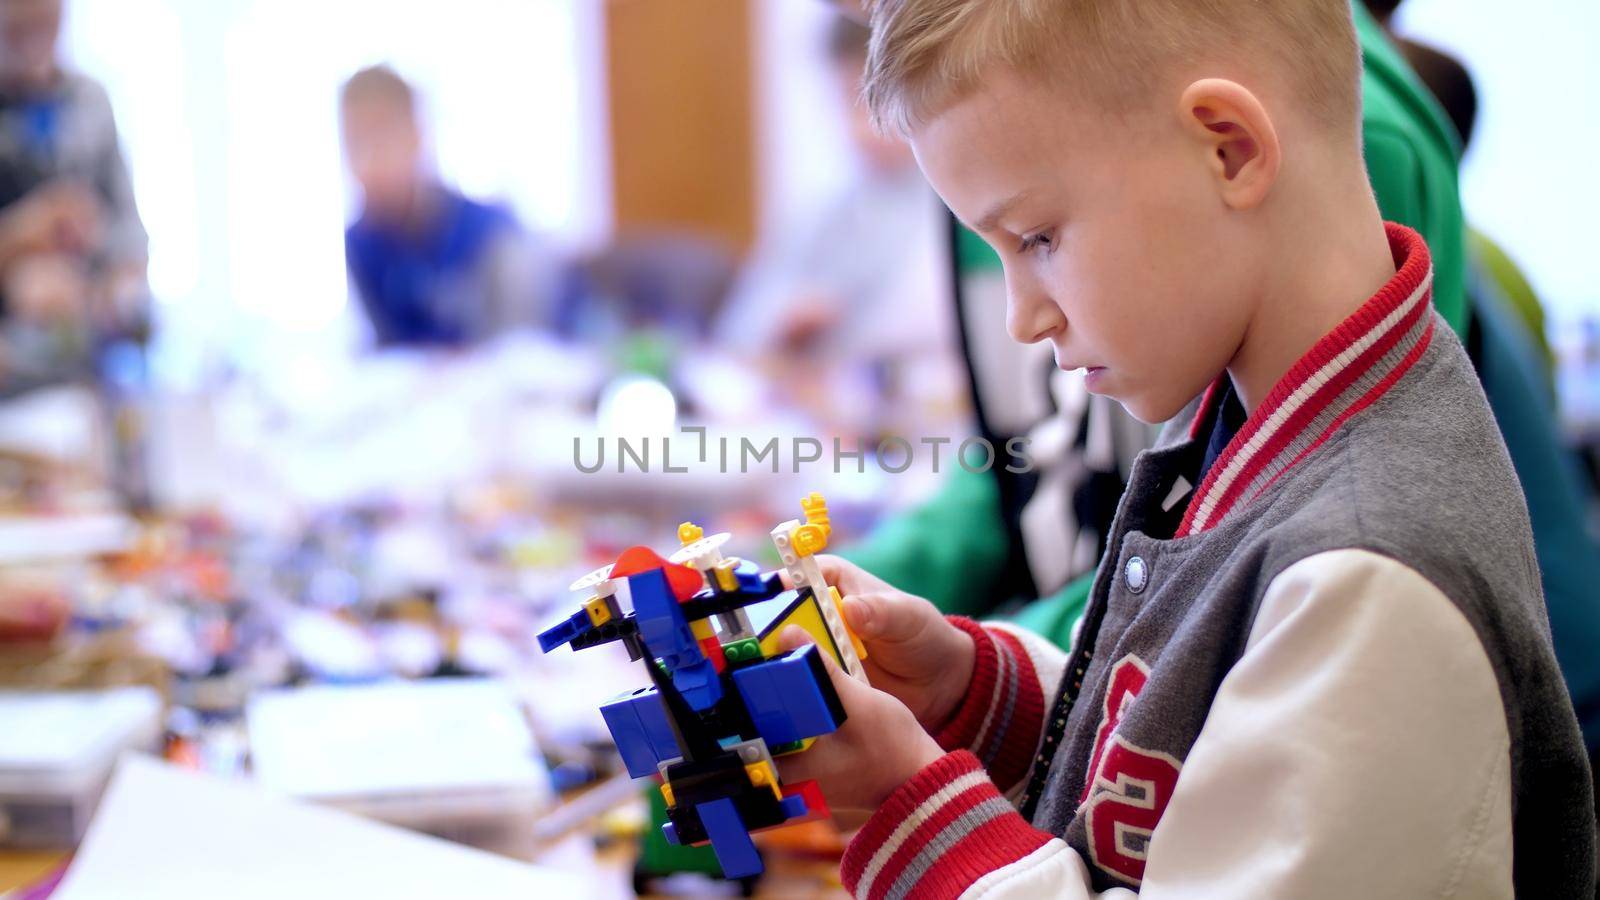 the boy of 10 years, plays in the designer from cubes, plates, circuits, wires. a small inventor creates robots, machines from different parts of the designer by djtreneryay